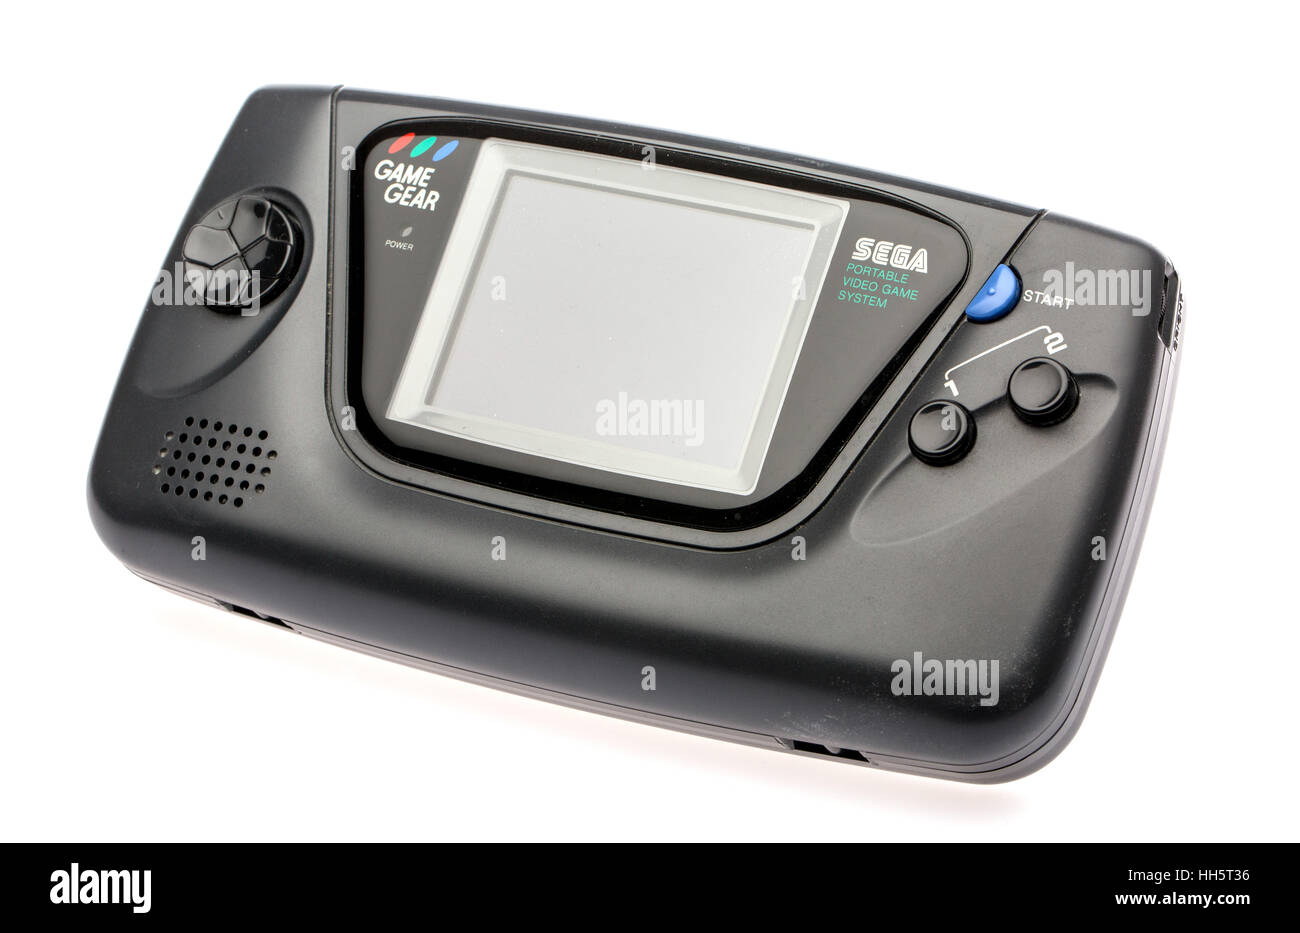 Sega Game Gear hand held console from the 90's Stock Photo